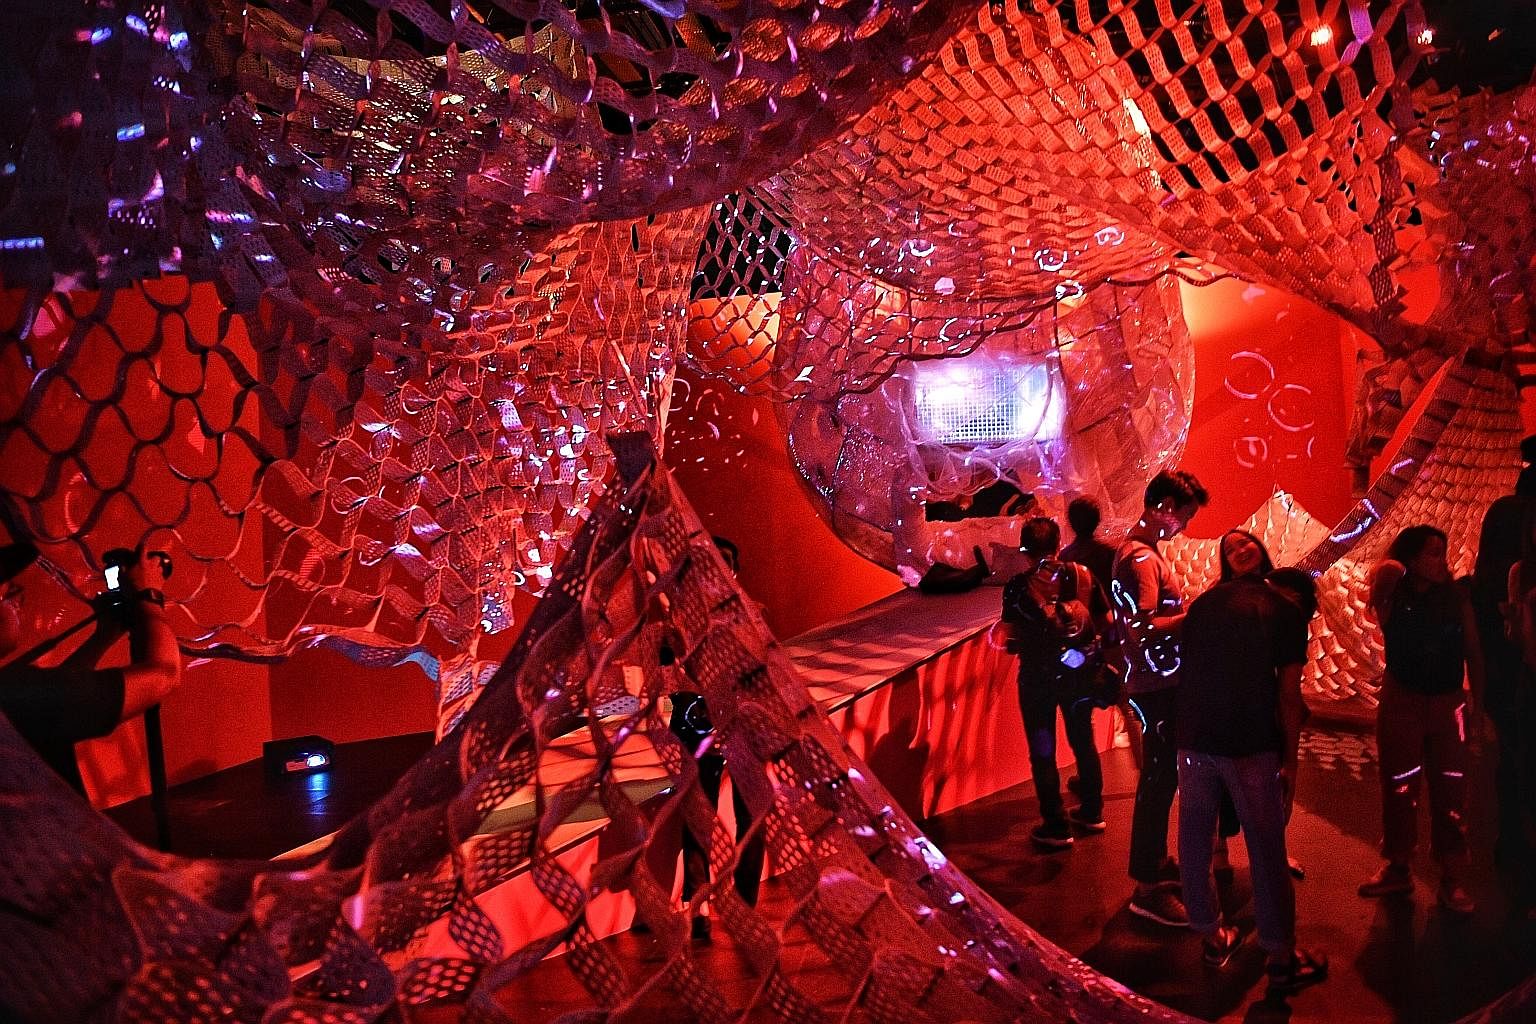 Sonic Womb by Randy Chan on display during Singapore Art Week last year. The coronavirus outbreak has hit arts groups hard, forcing them to cancel or postpone their shows and the industry to chalk up huge losses. But it has also been a catalyst for d